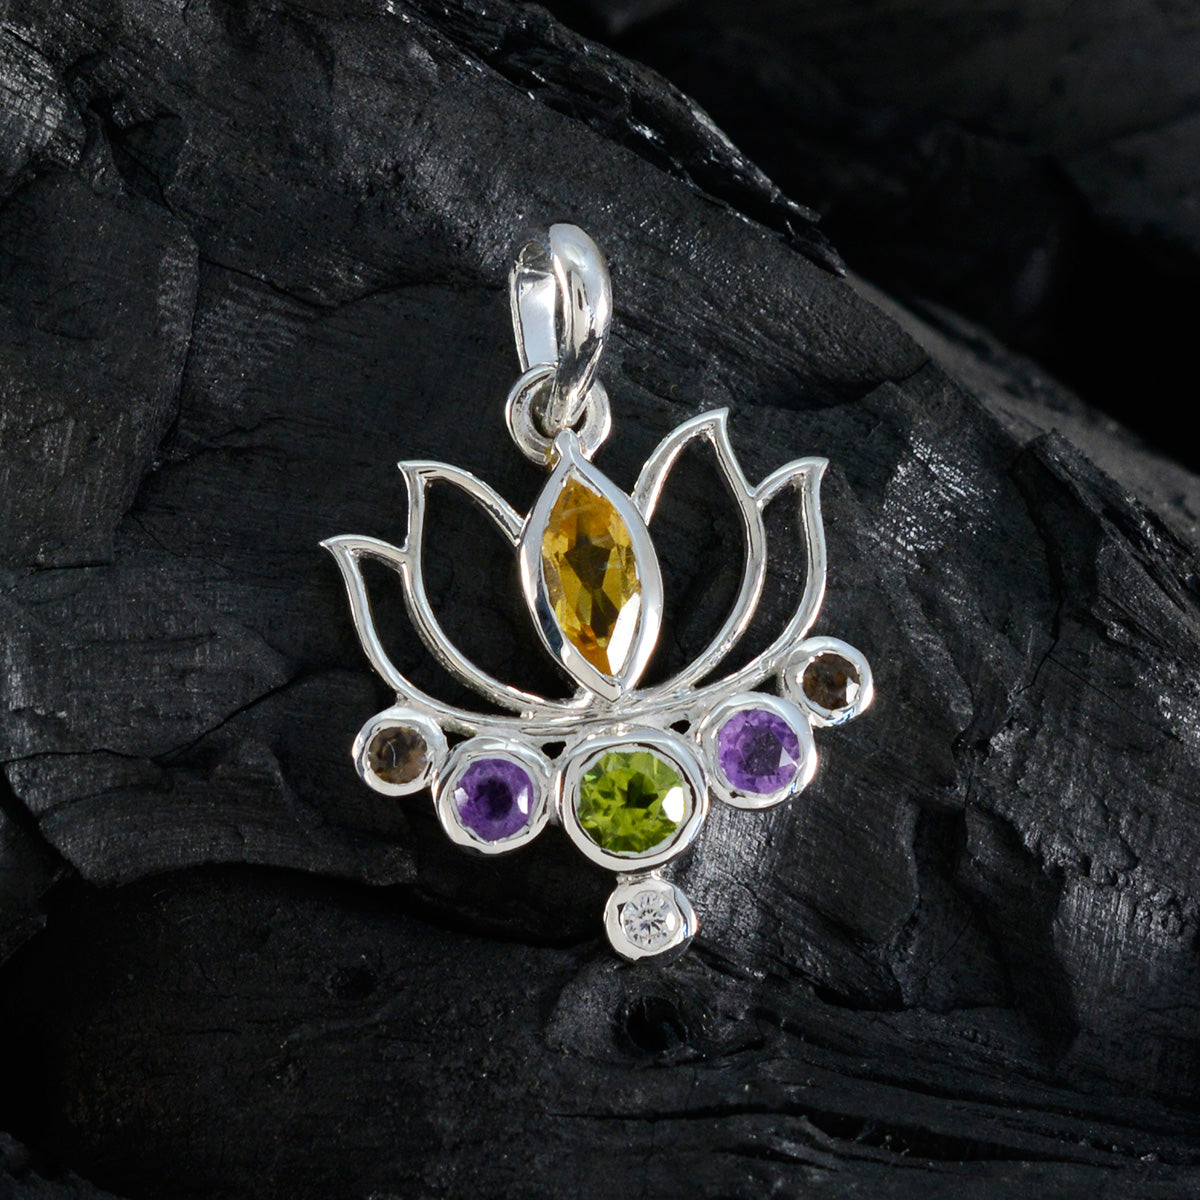 Riyo Comely Gems Multi Faceted Multi Color Multi Stone Solid Silver Pendant Gift For Anniversary